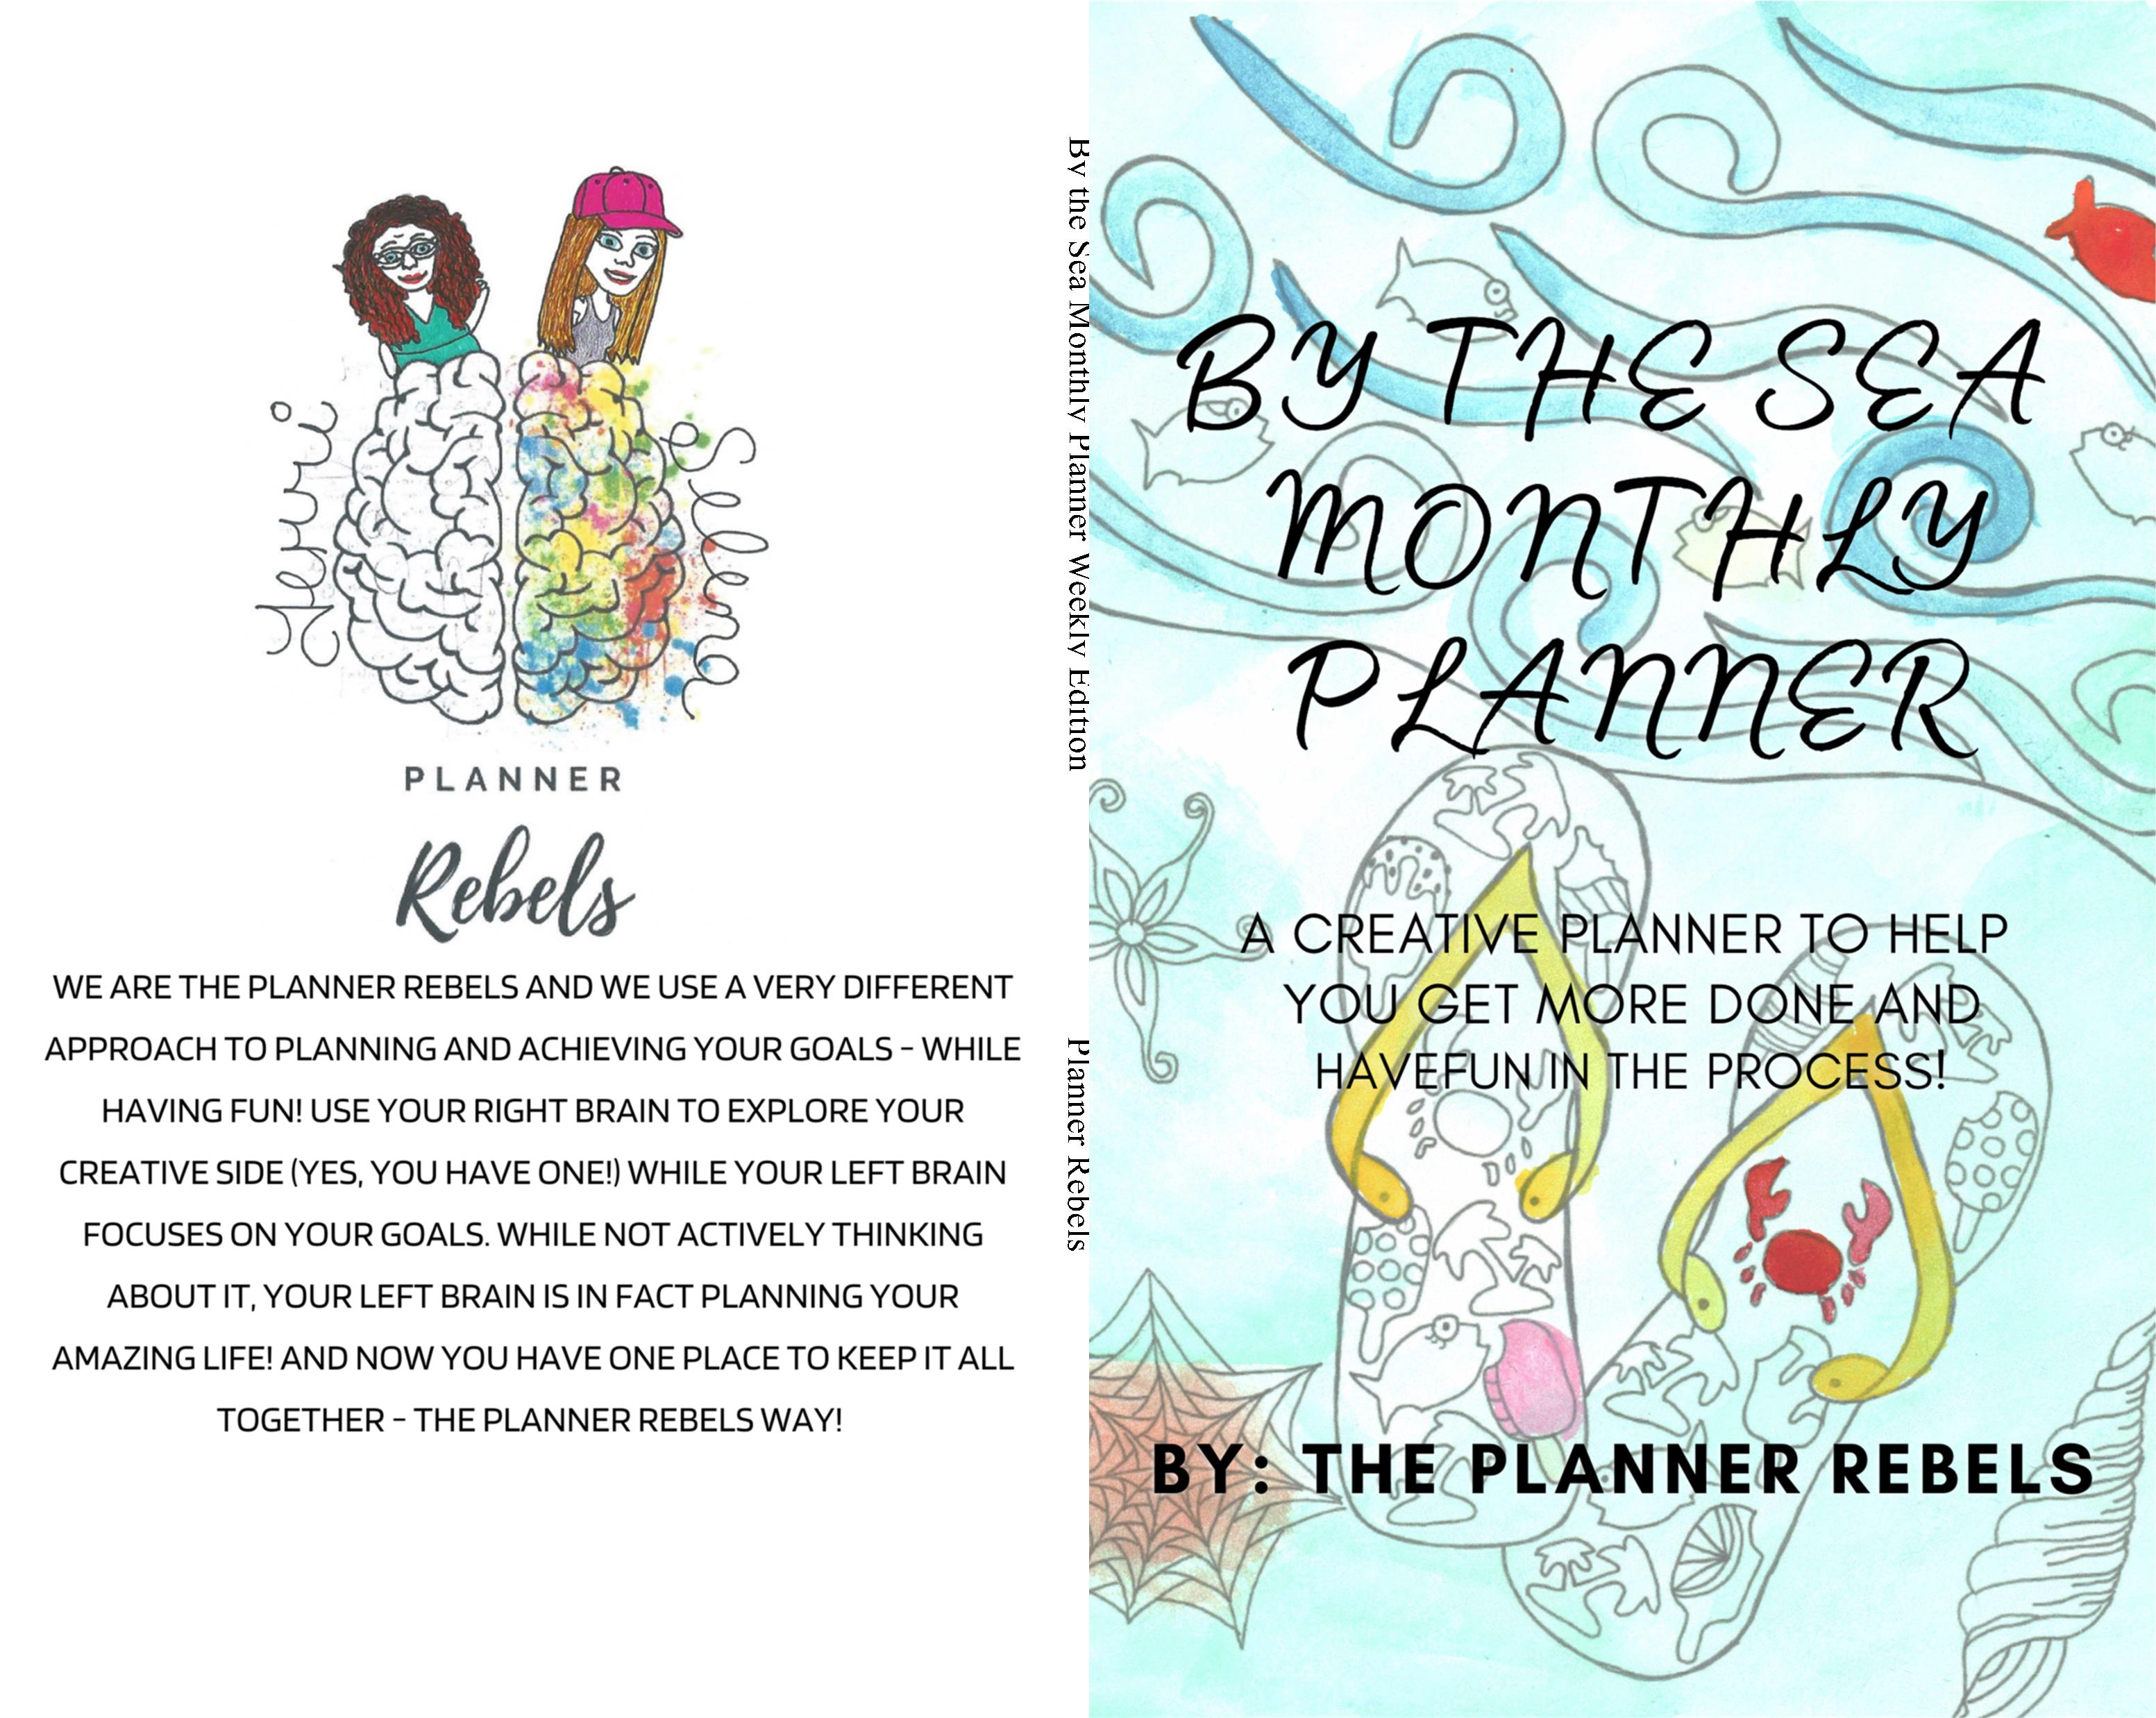 By the Sea Monthly Planner Weekly Edition cover image